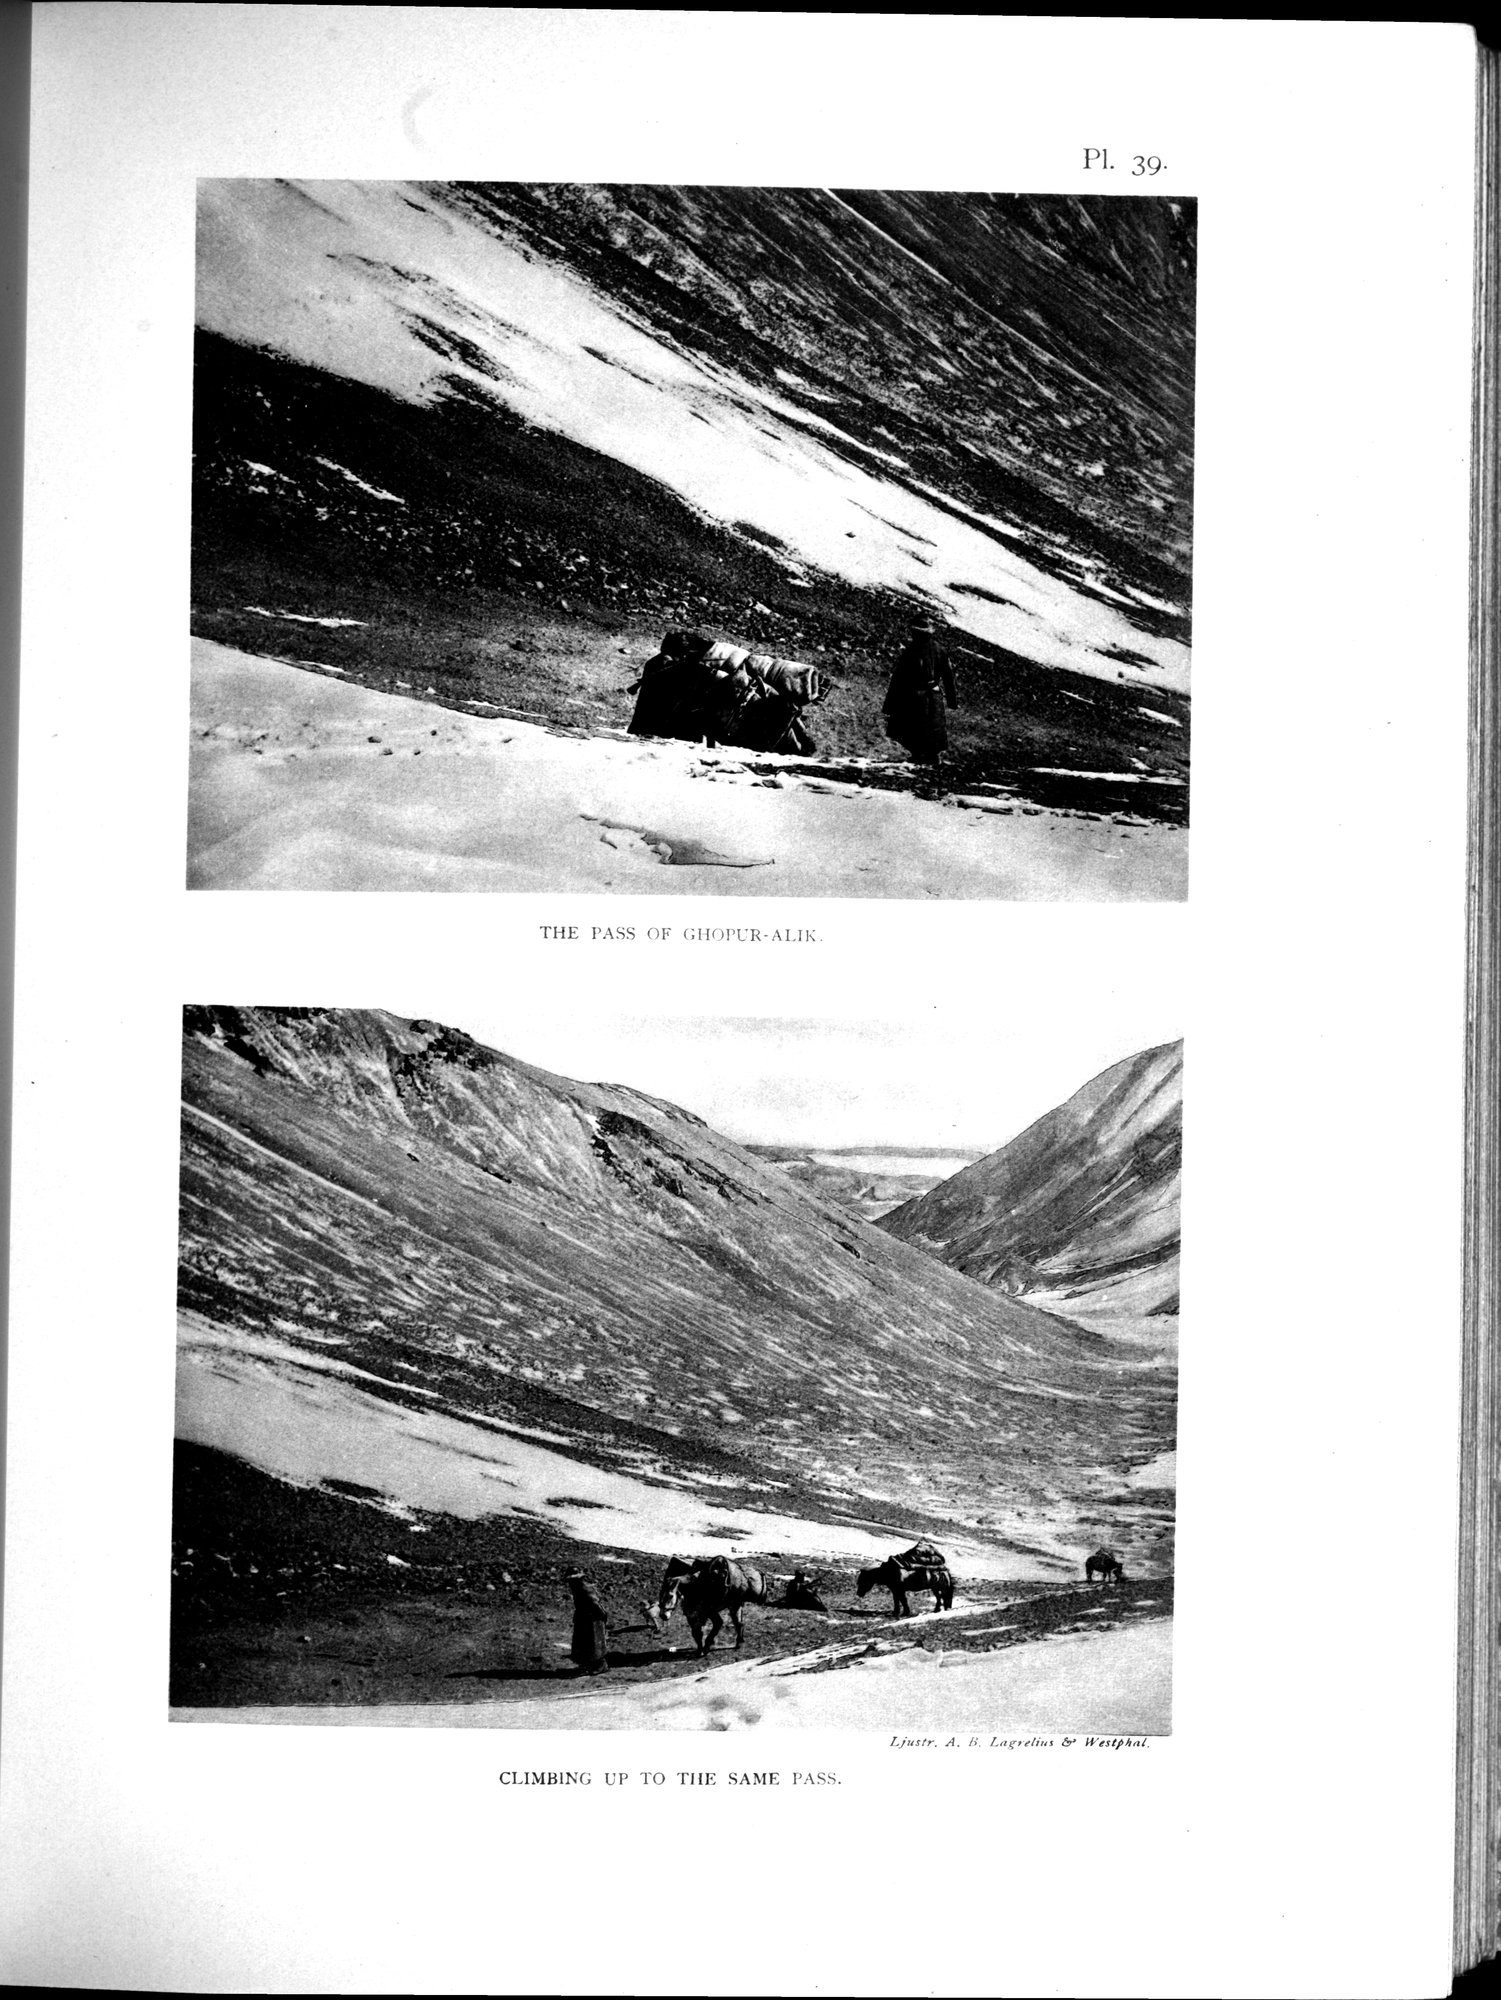 Scientific Results of a Journey in Central Asia, 1899-1902 : vol.3 / 359 ページ（白黒高解像度画像）